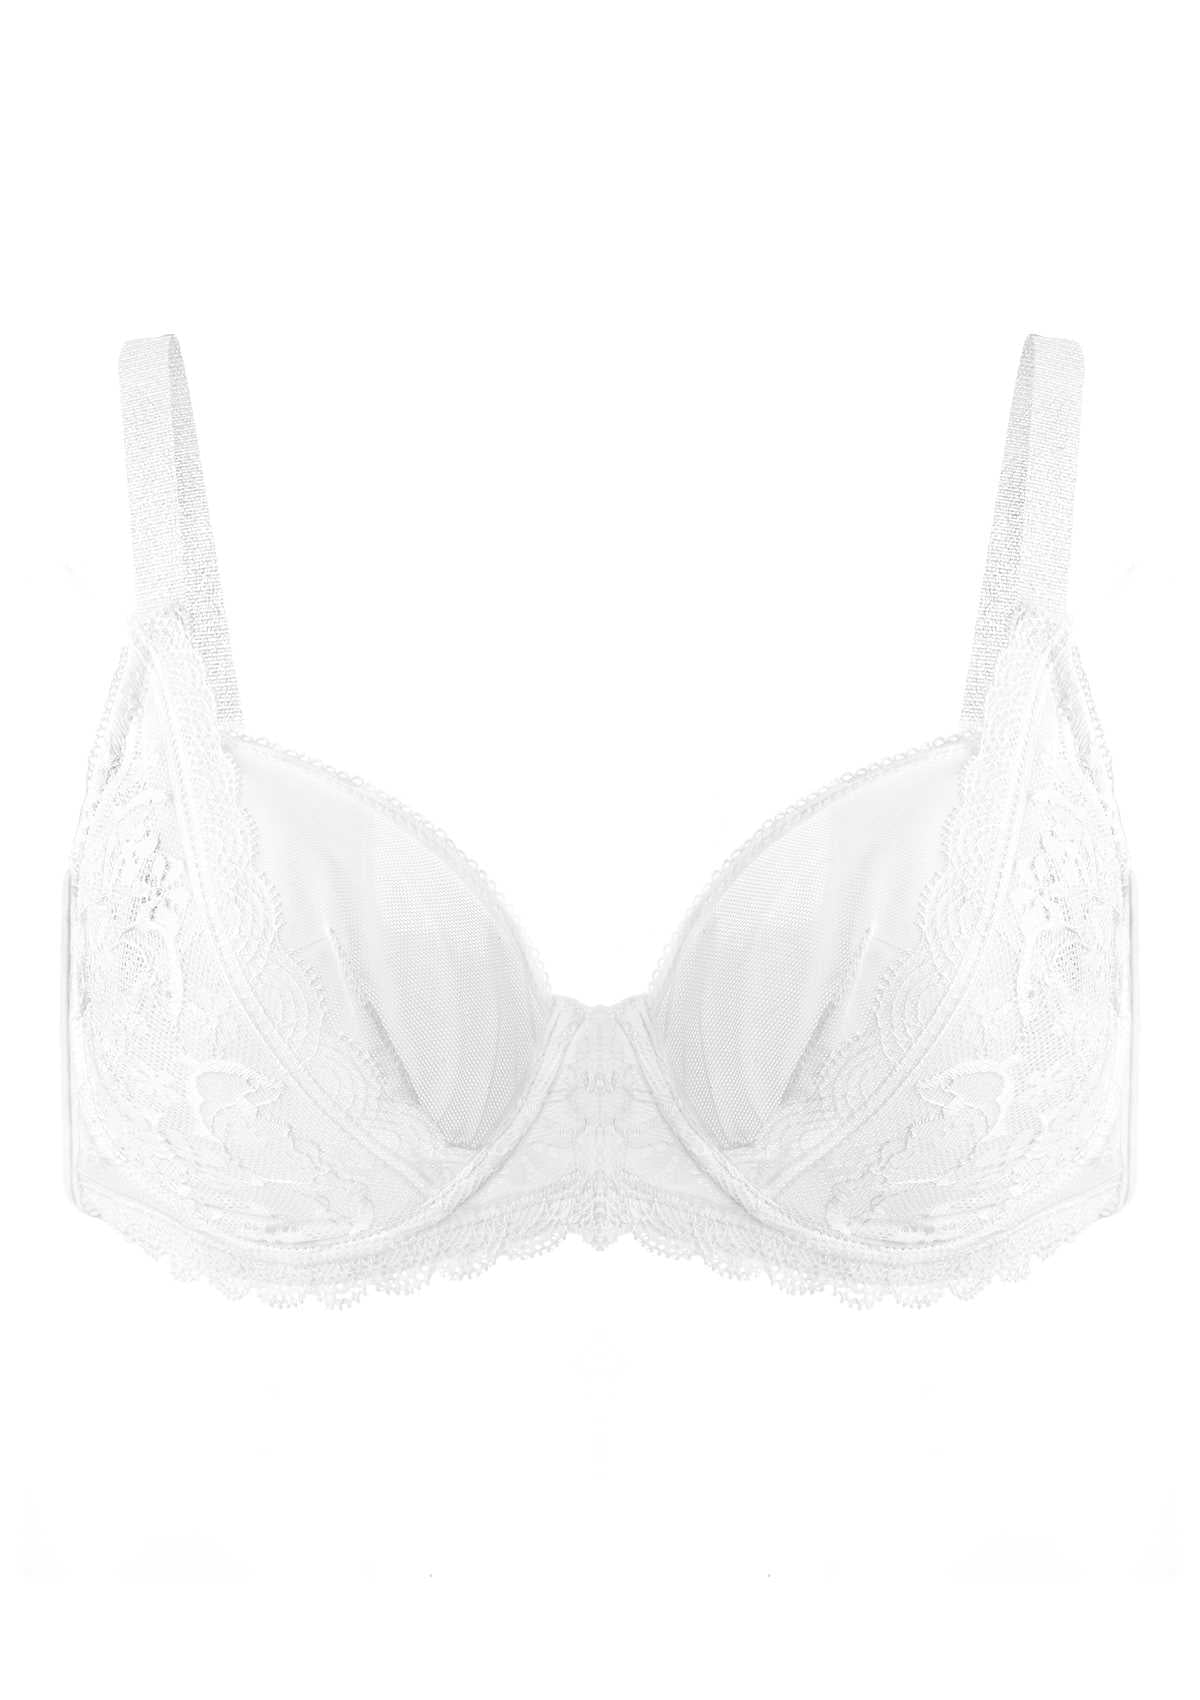 HSIA Anemone Big Bra: Best Bra For Lift And Support, Floral Bra - Light Blue / 36 / DDD/F